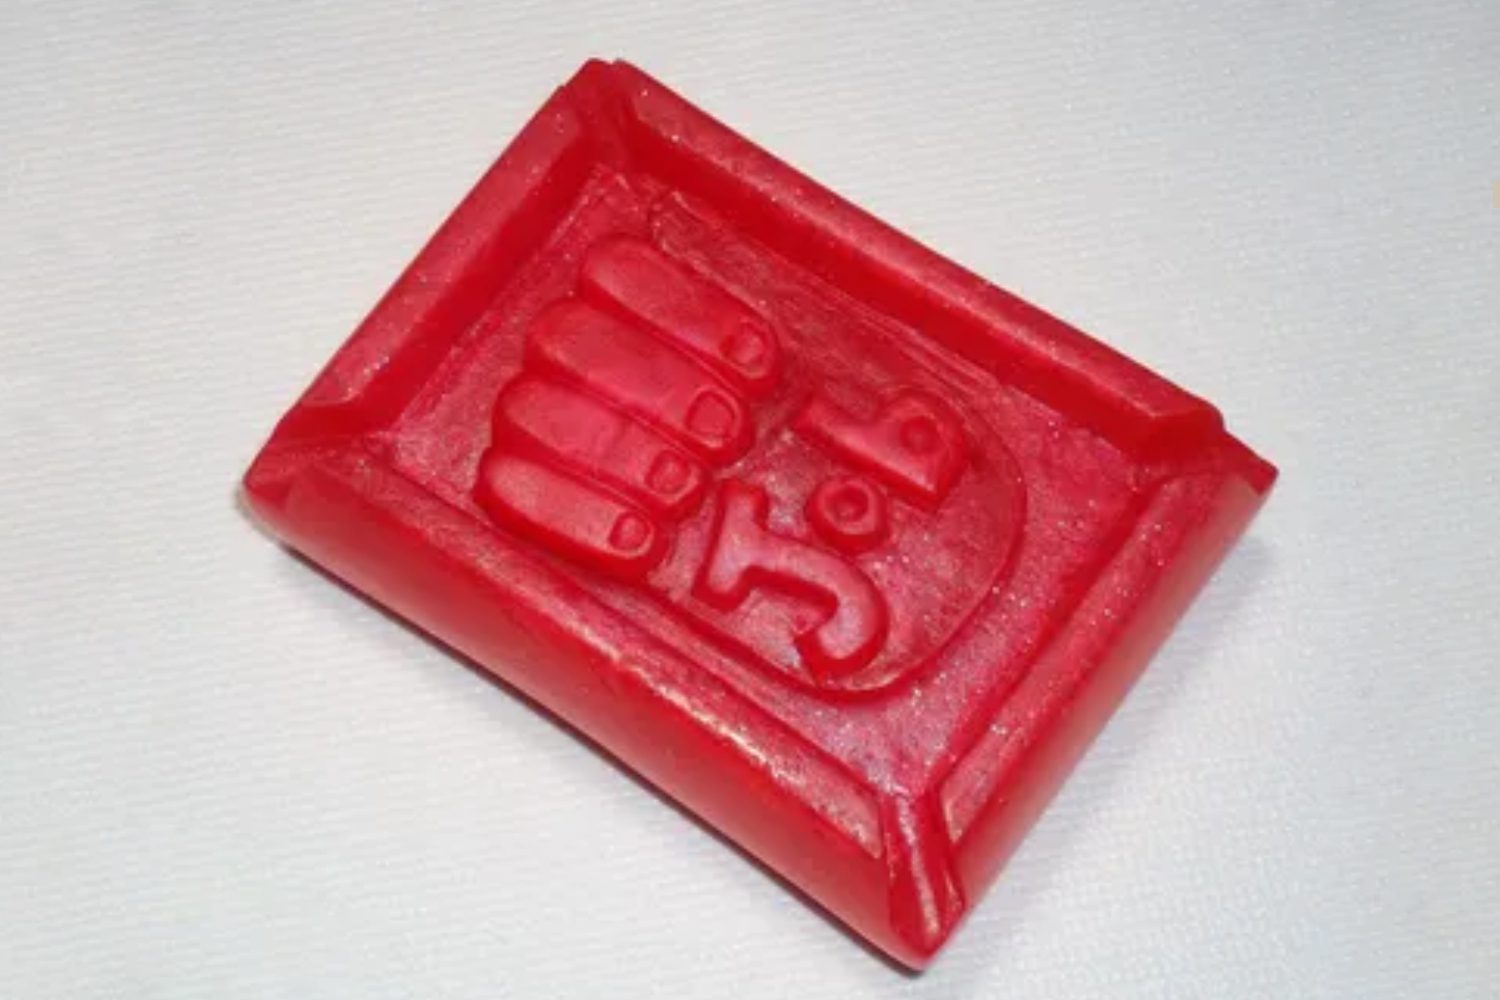 A red soap with the number 5 on it.